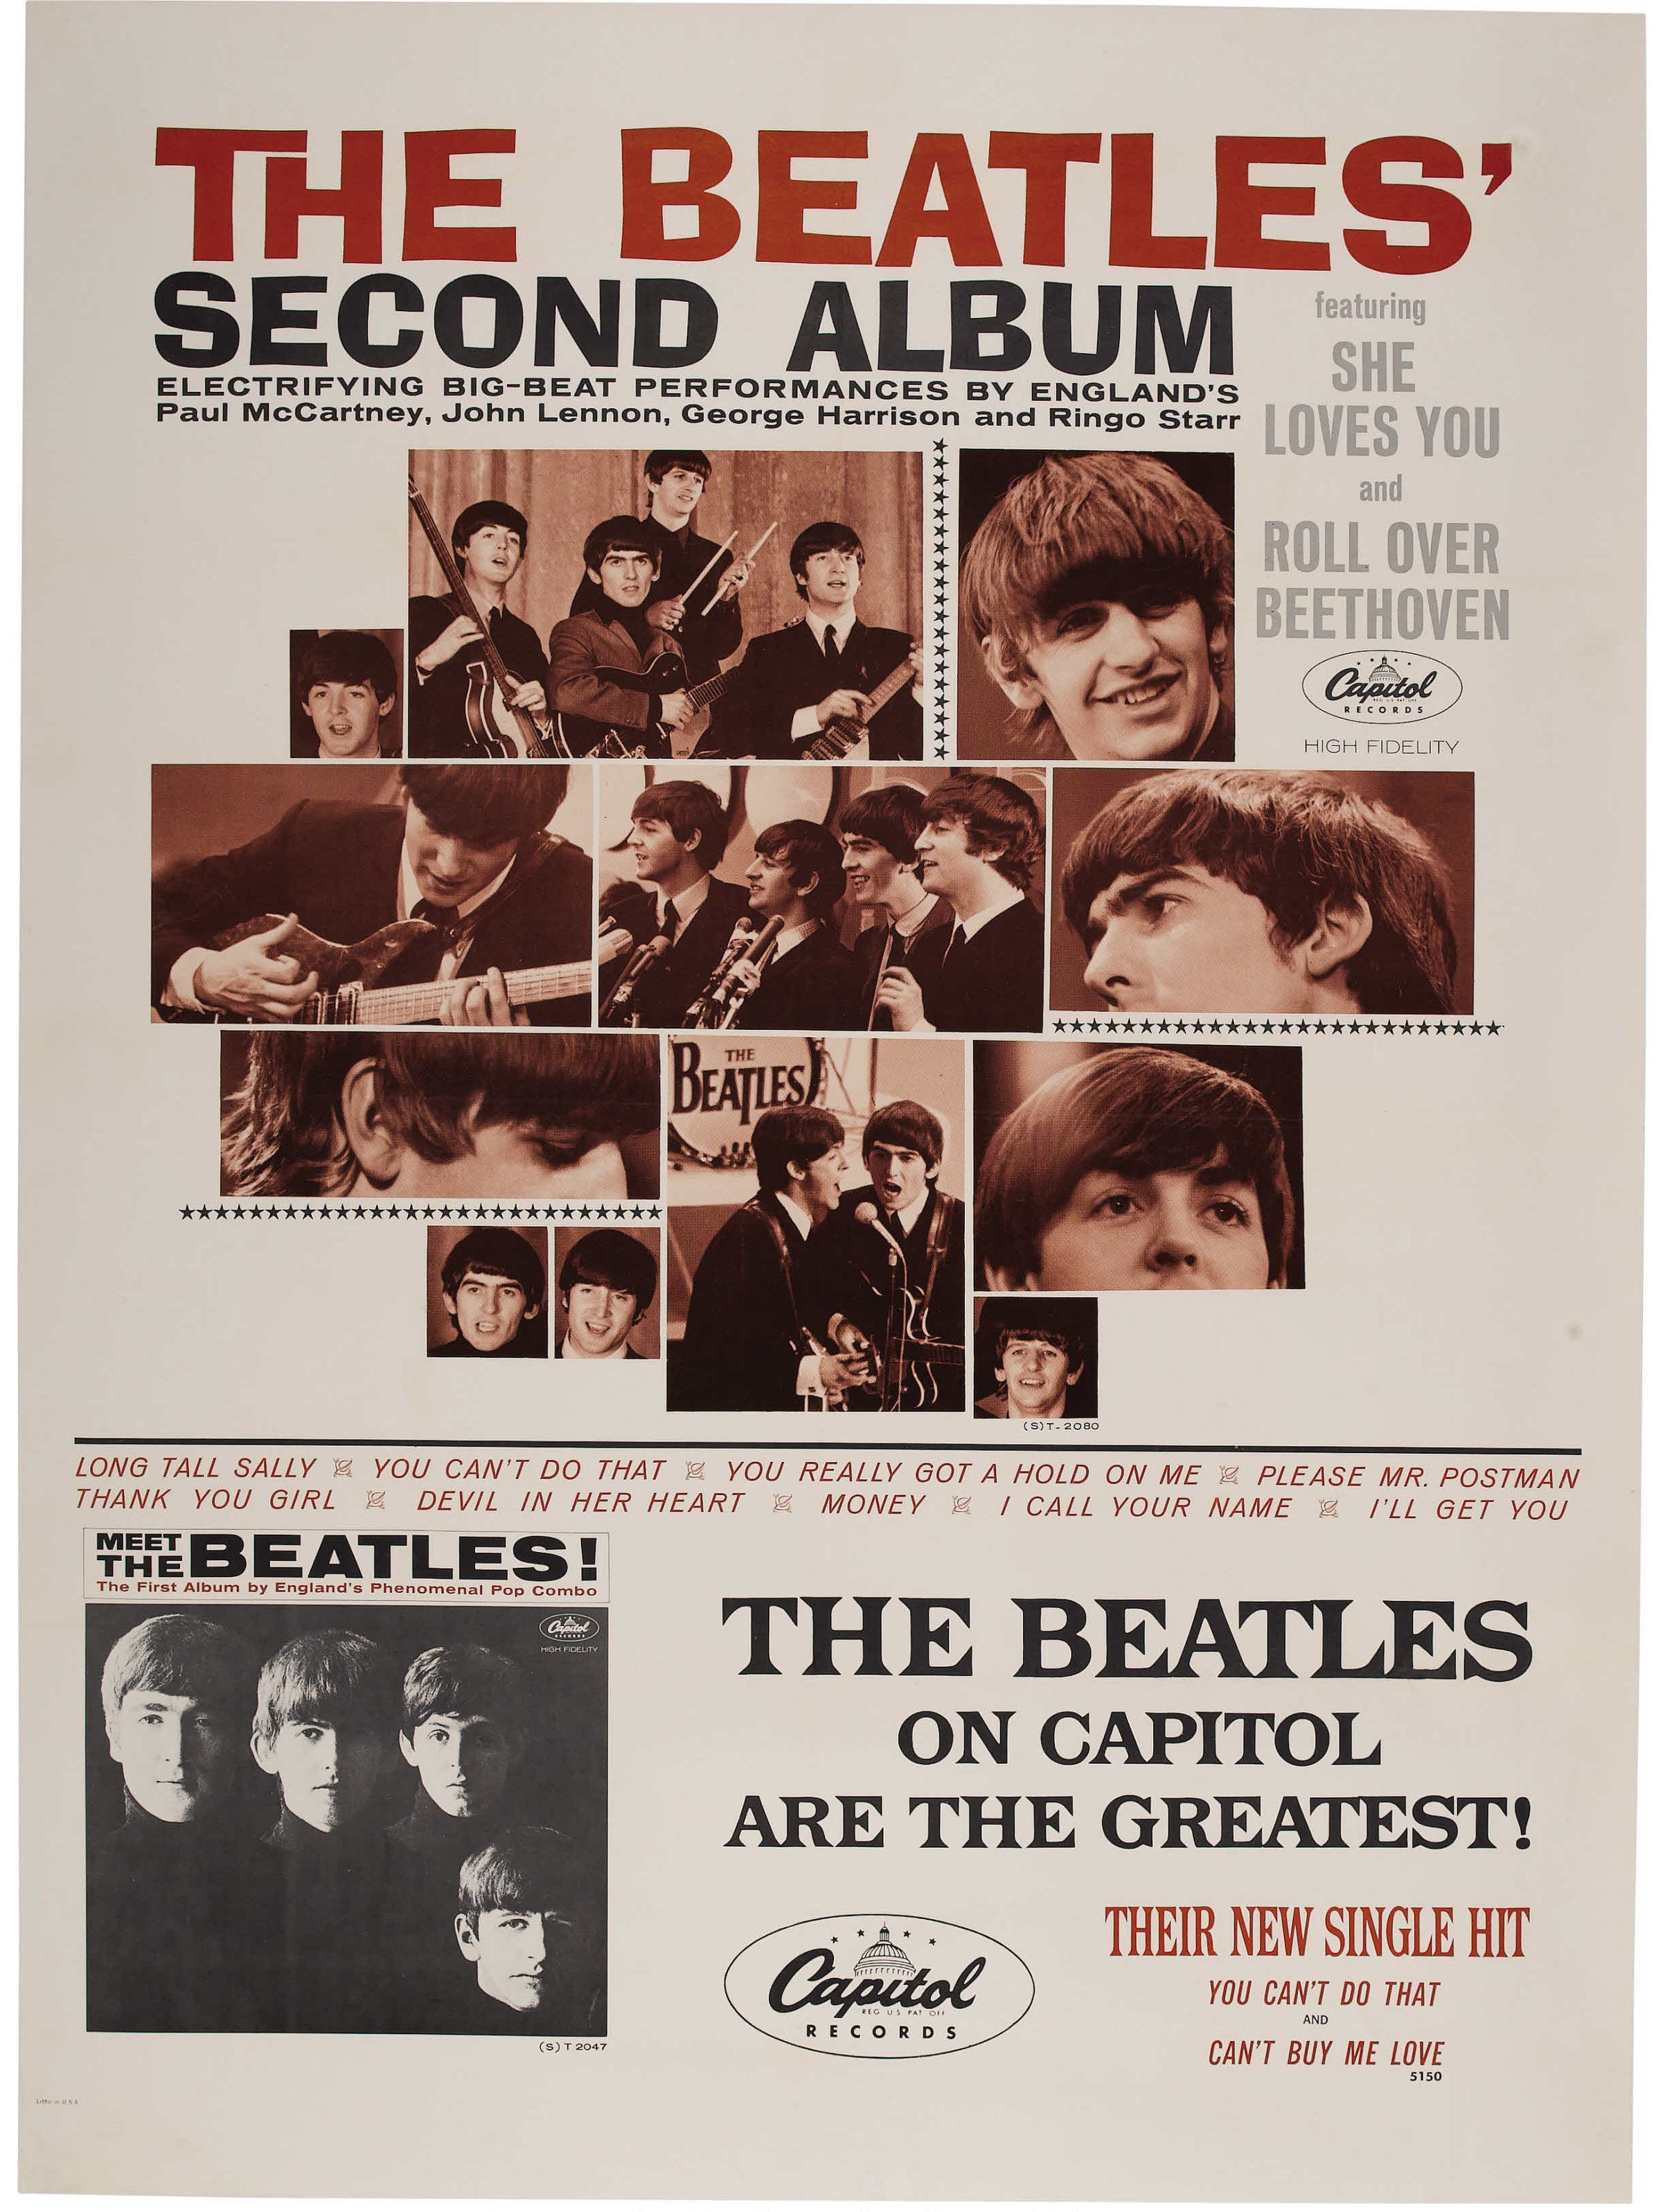 The Beatles "Meet the Beatles" Second Album Promotional Poster 1964 Concert Poster